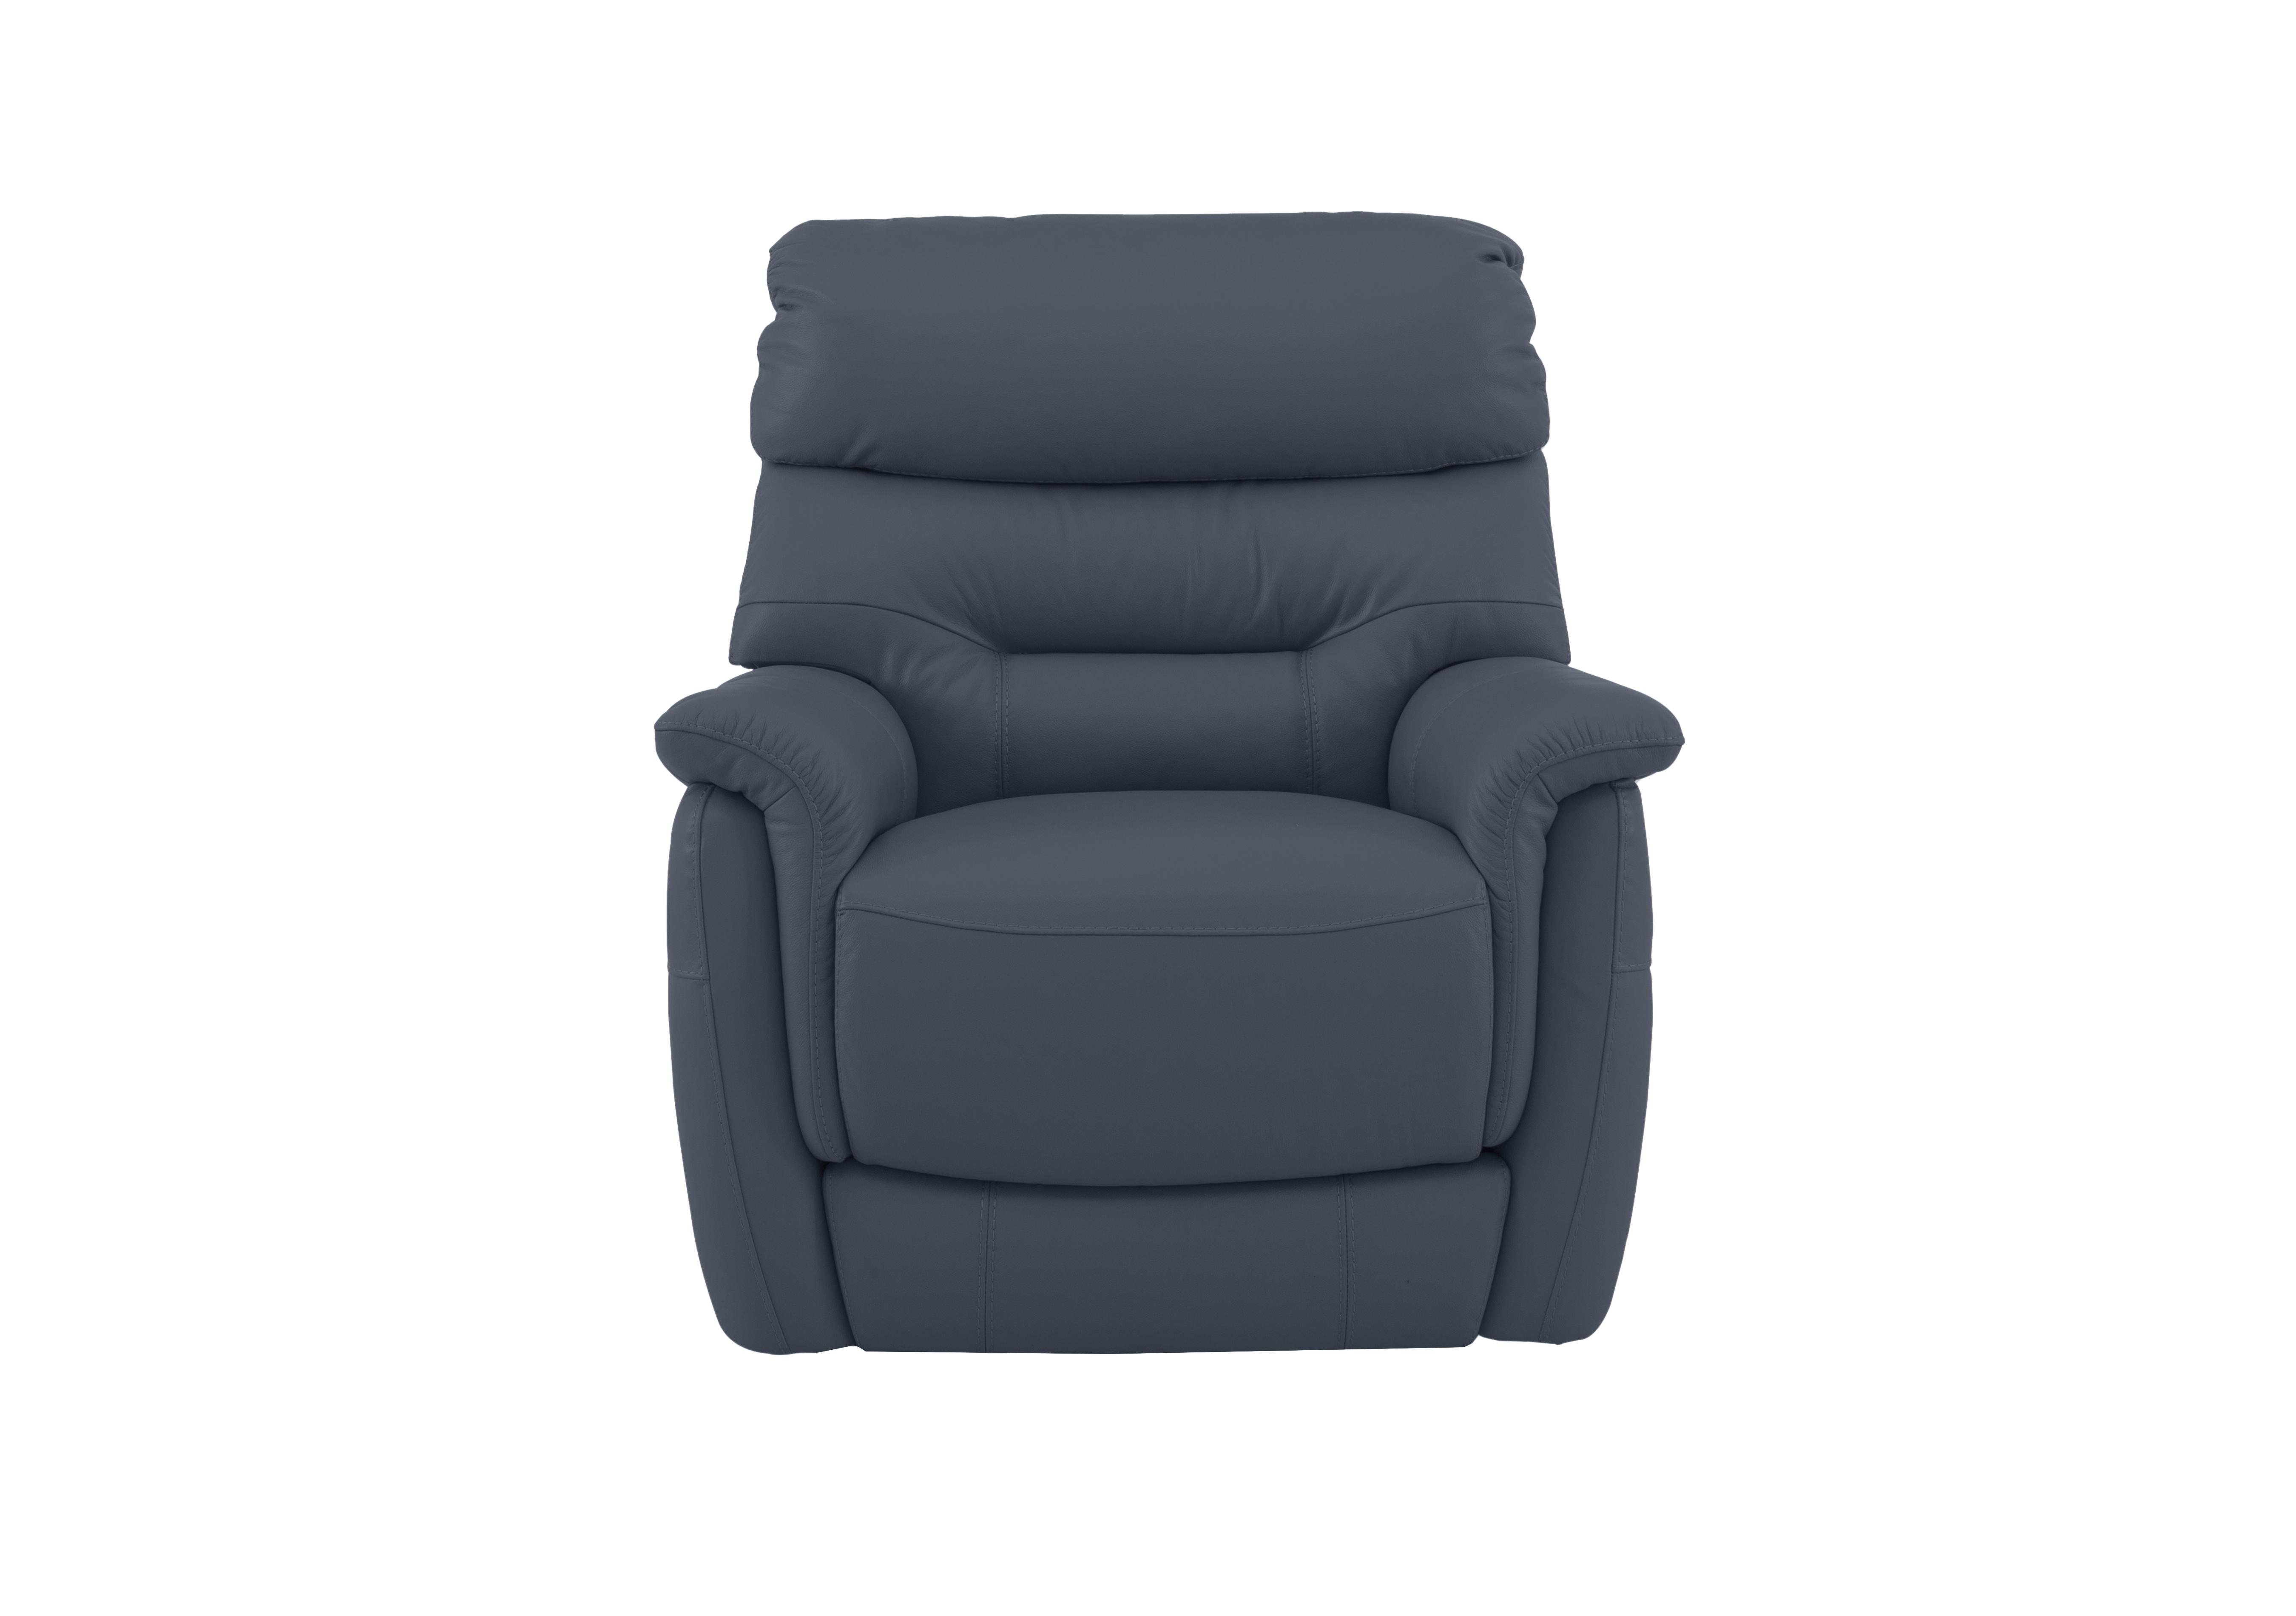 Chicago Leather Armchair in Bv-313e Ocean Blue on Furniture Village